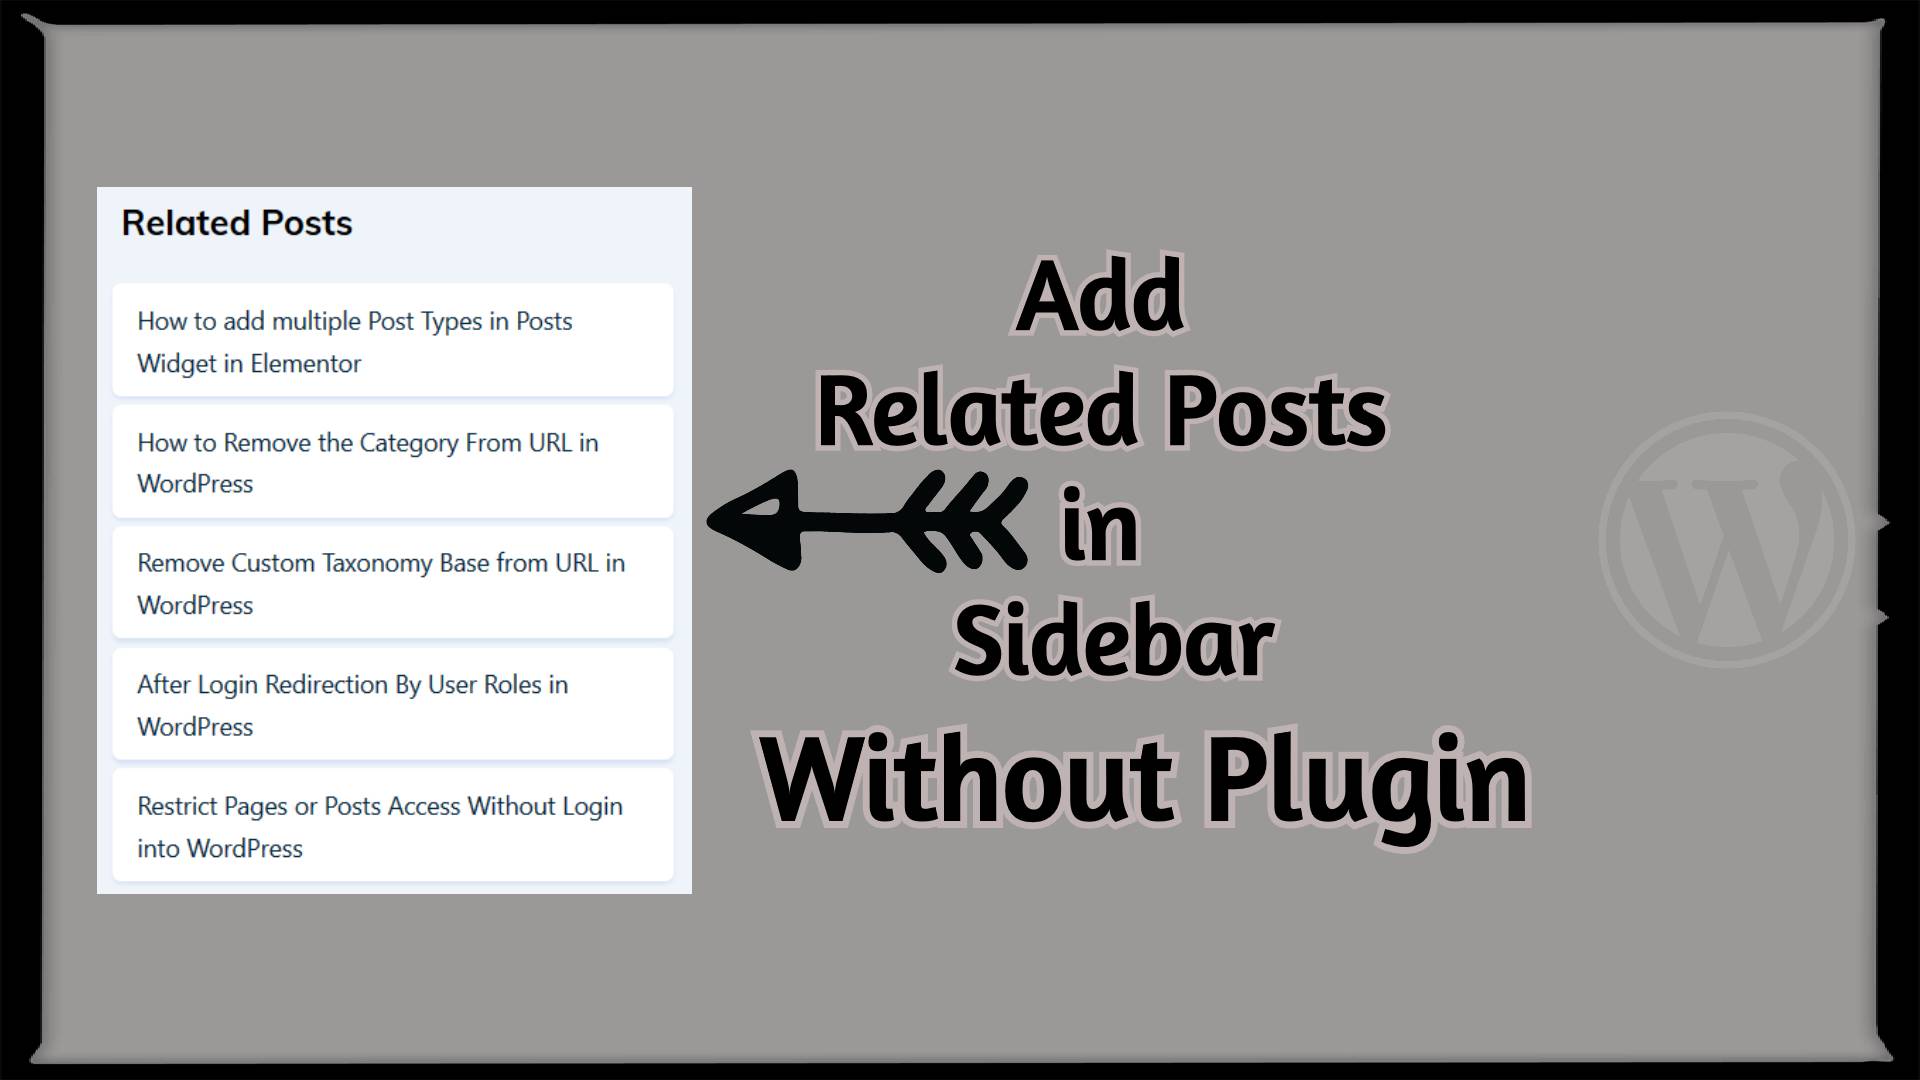 Add Related Posts Without Plugin in WordPress for Sidebar